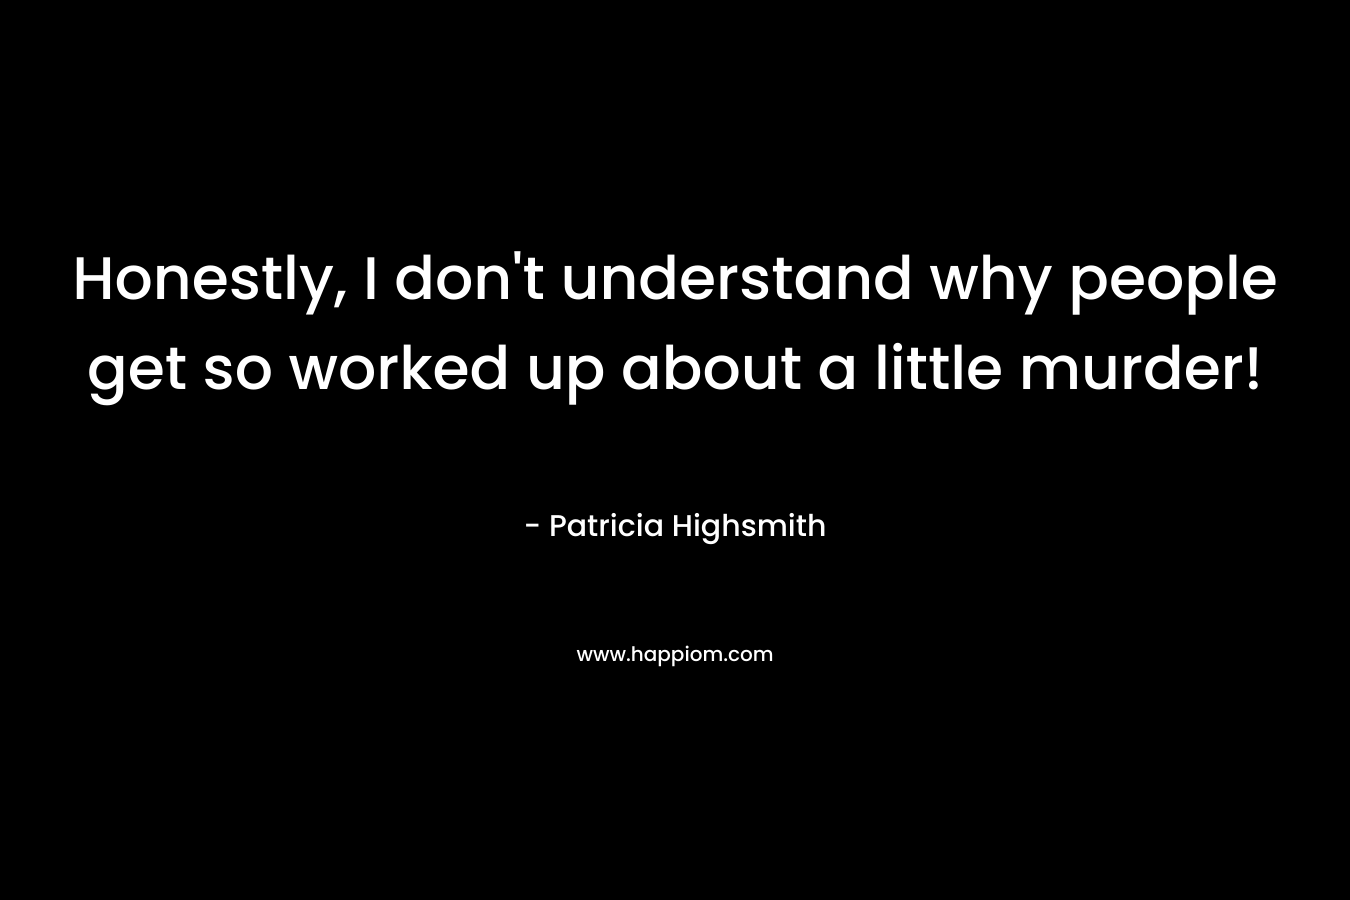 Honestly, I don’t understand why people get so worked up about a little murder! – Patricia Highsmith